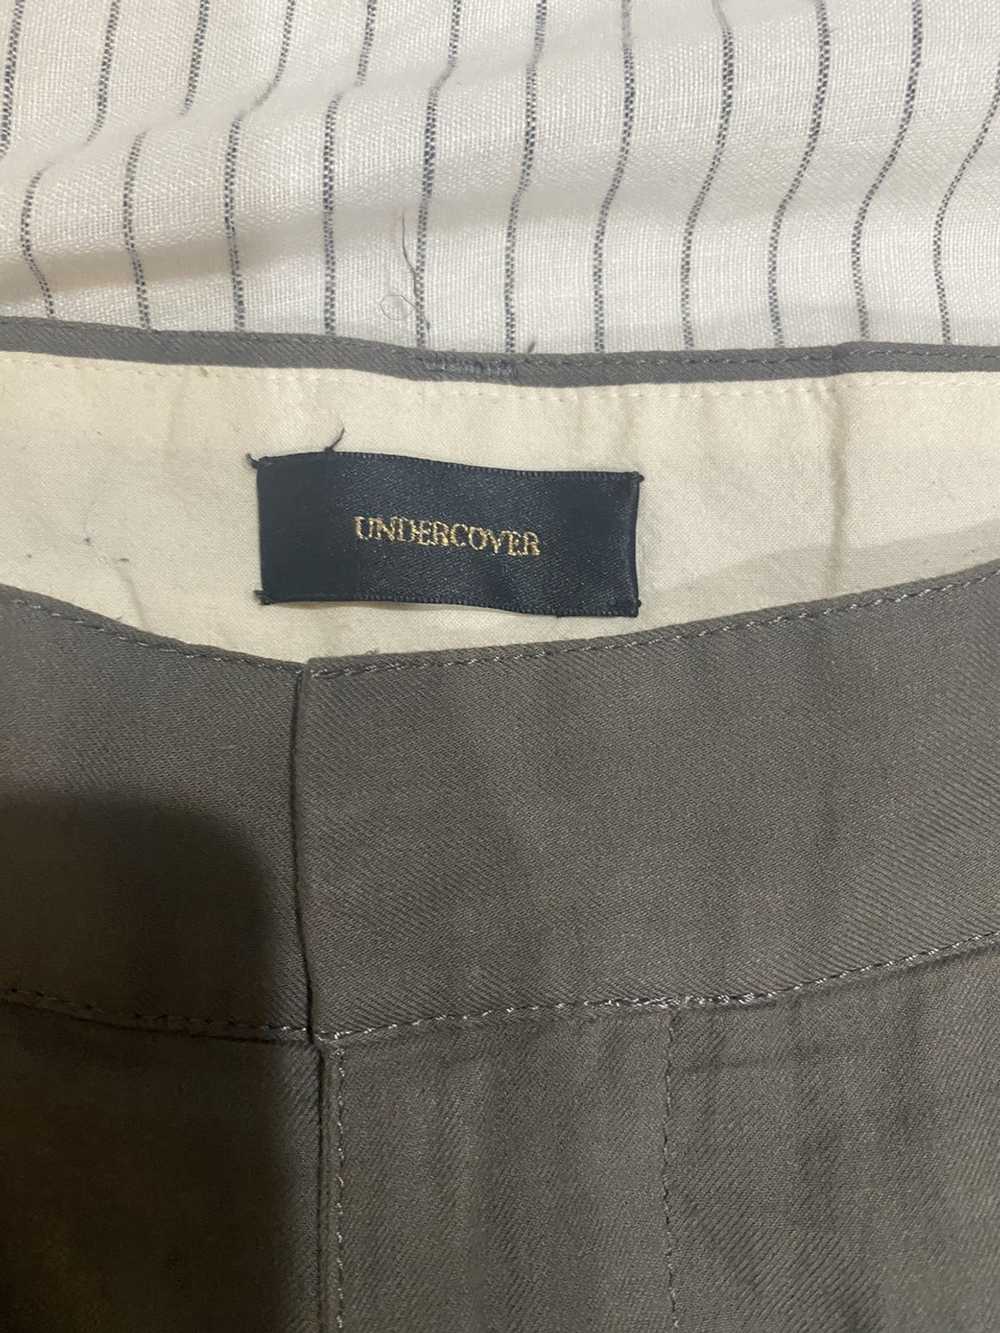 Undercover Undercover Pants - image 5